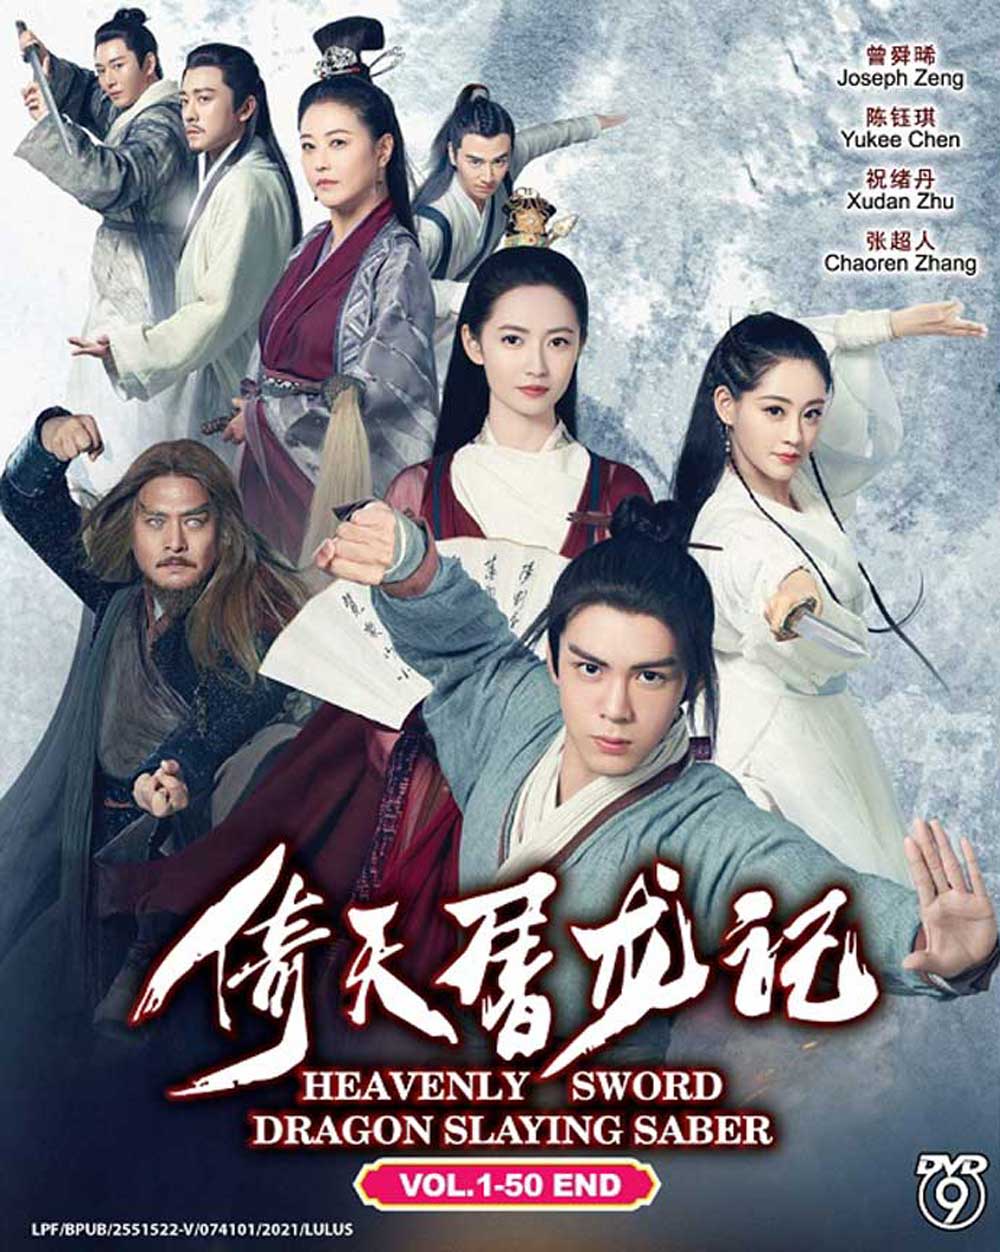 heavenly sword and dragon sabre 2019 review